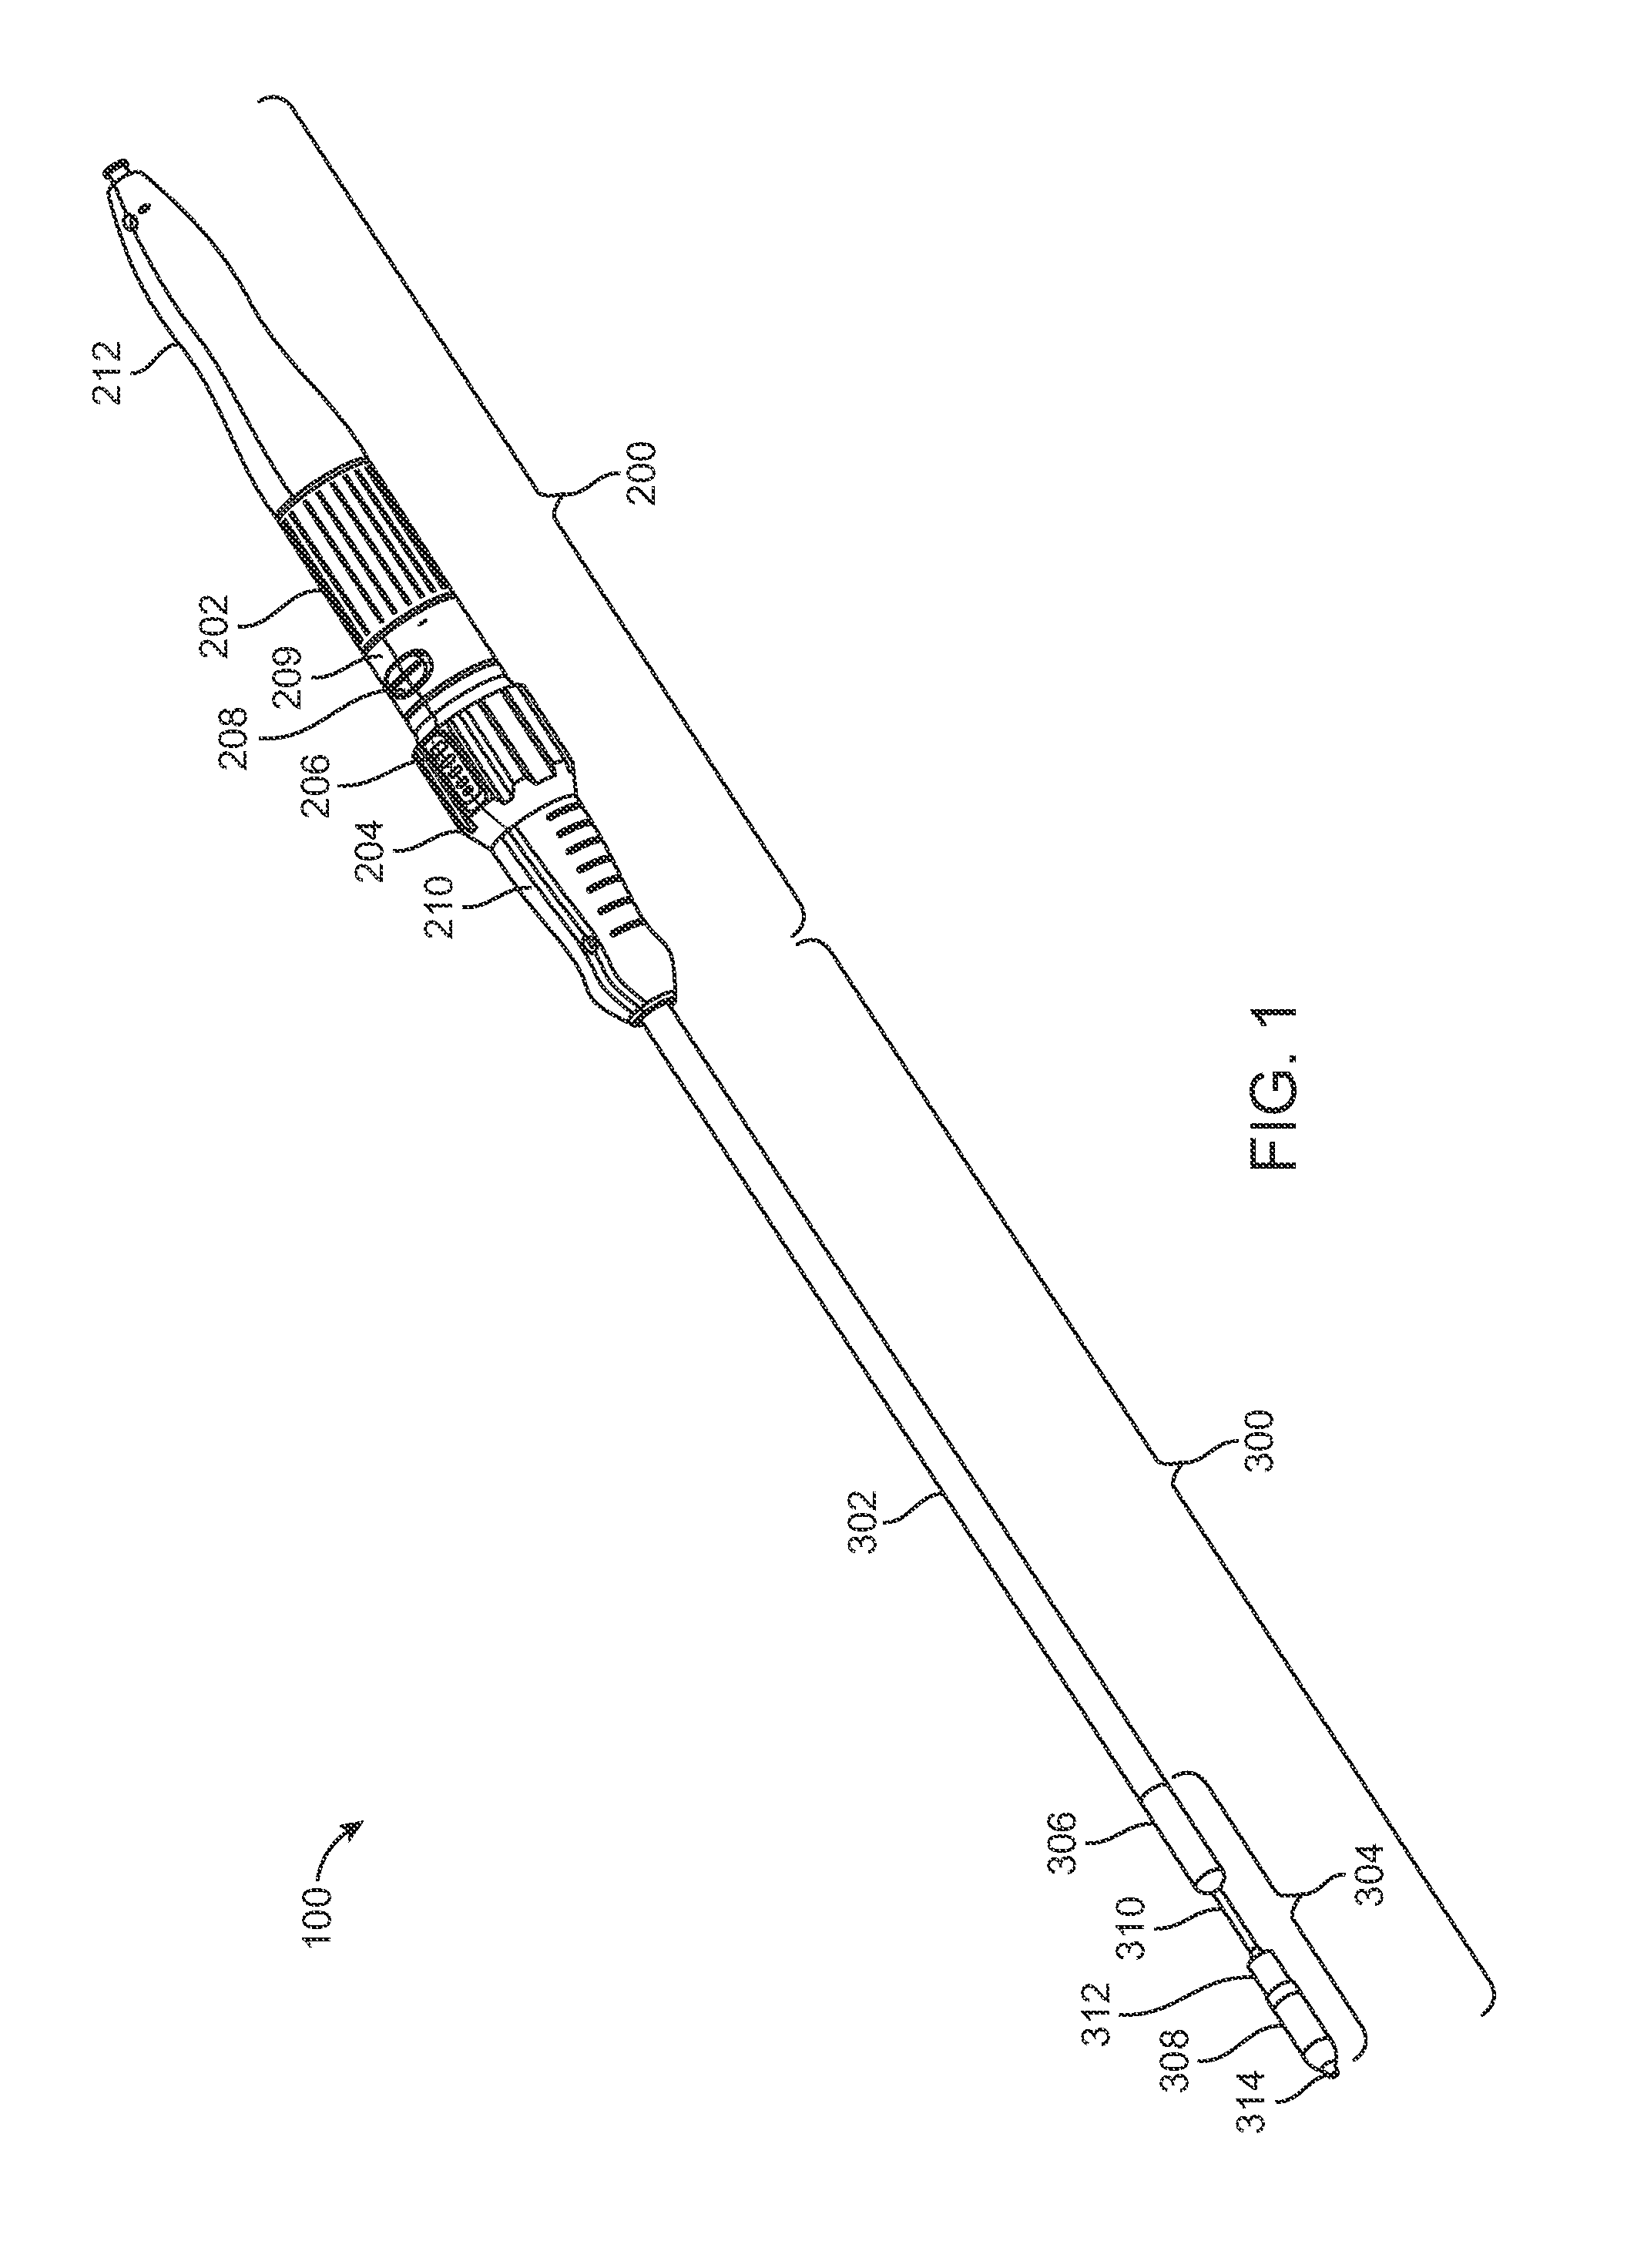 Trans-Aortic Delivery System With Containment Capsule Centering Device